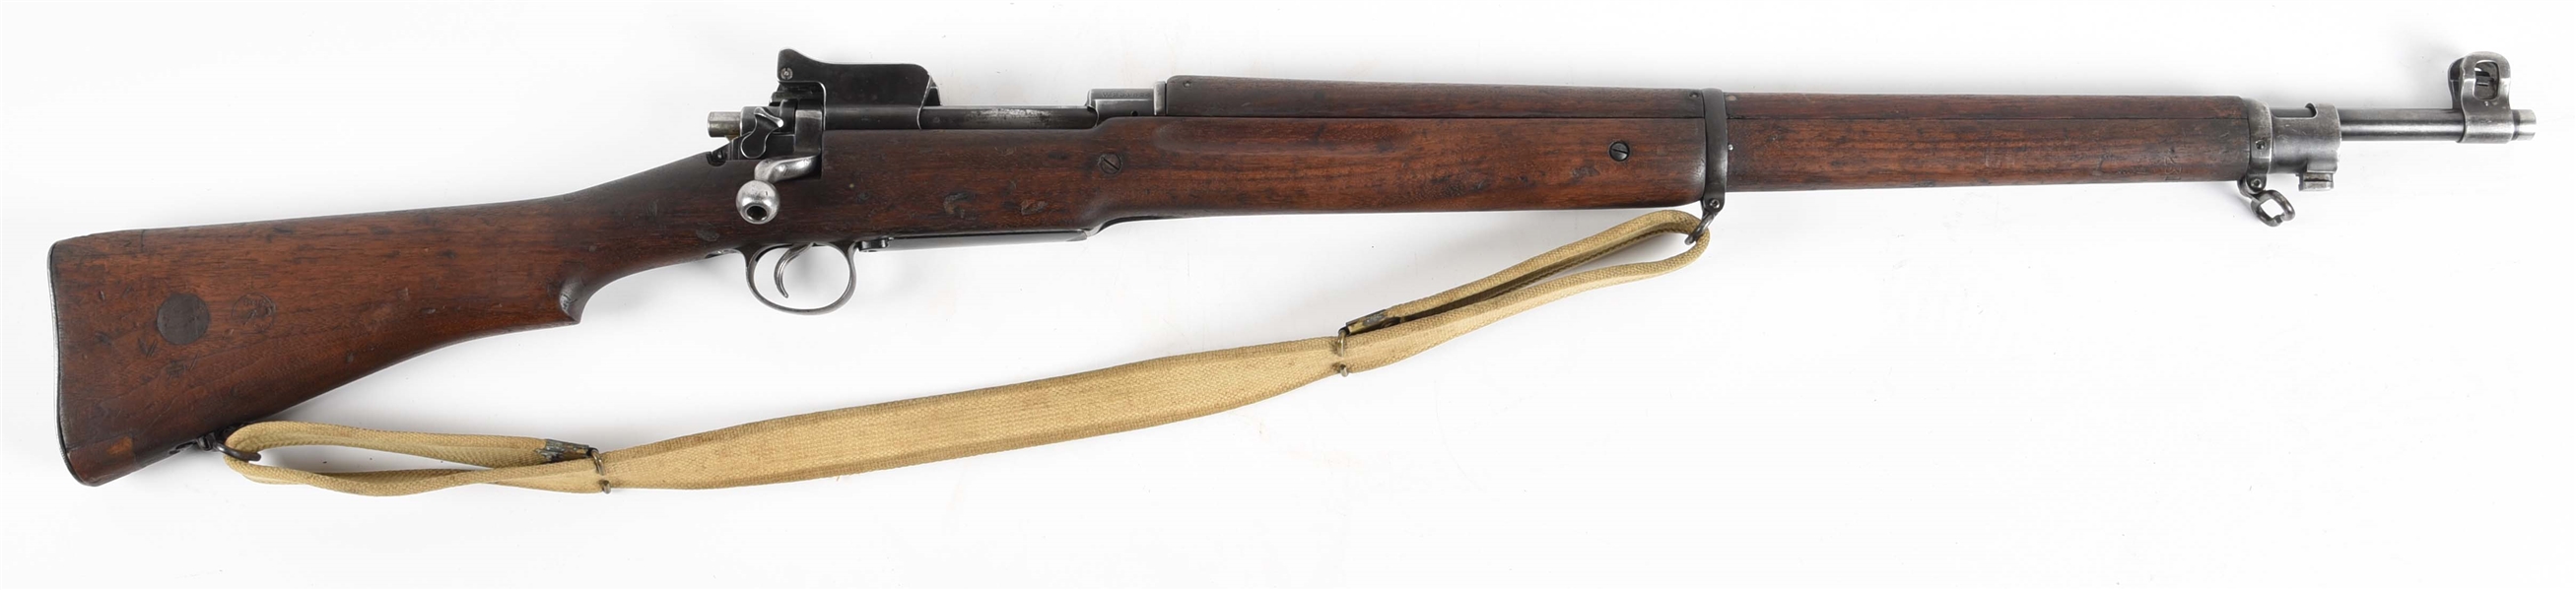 (C) WINCHESTER ENFIELD PATTERN 1914 BOLT ACTION RIFLE.